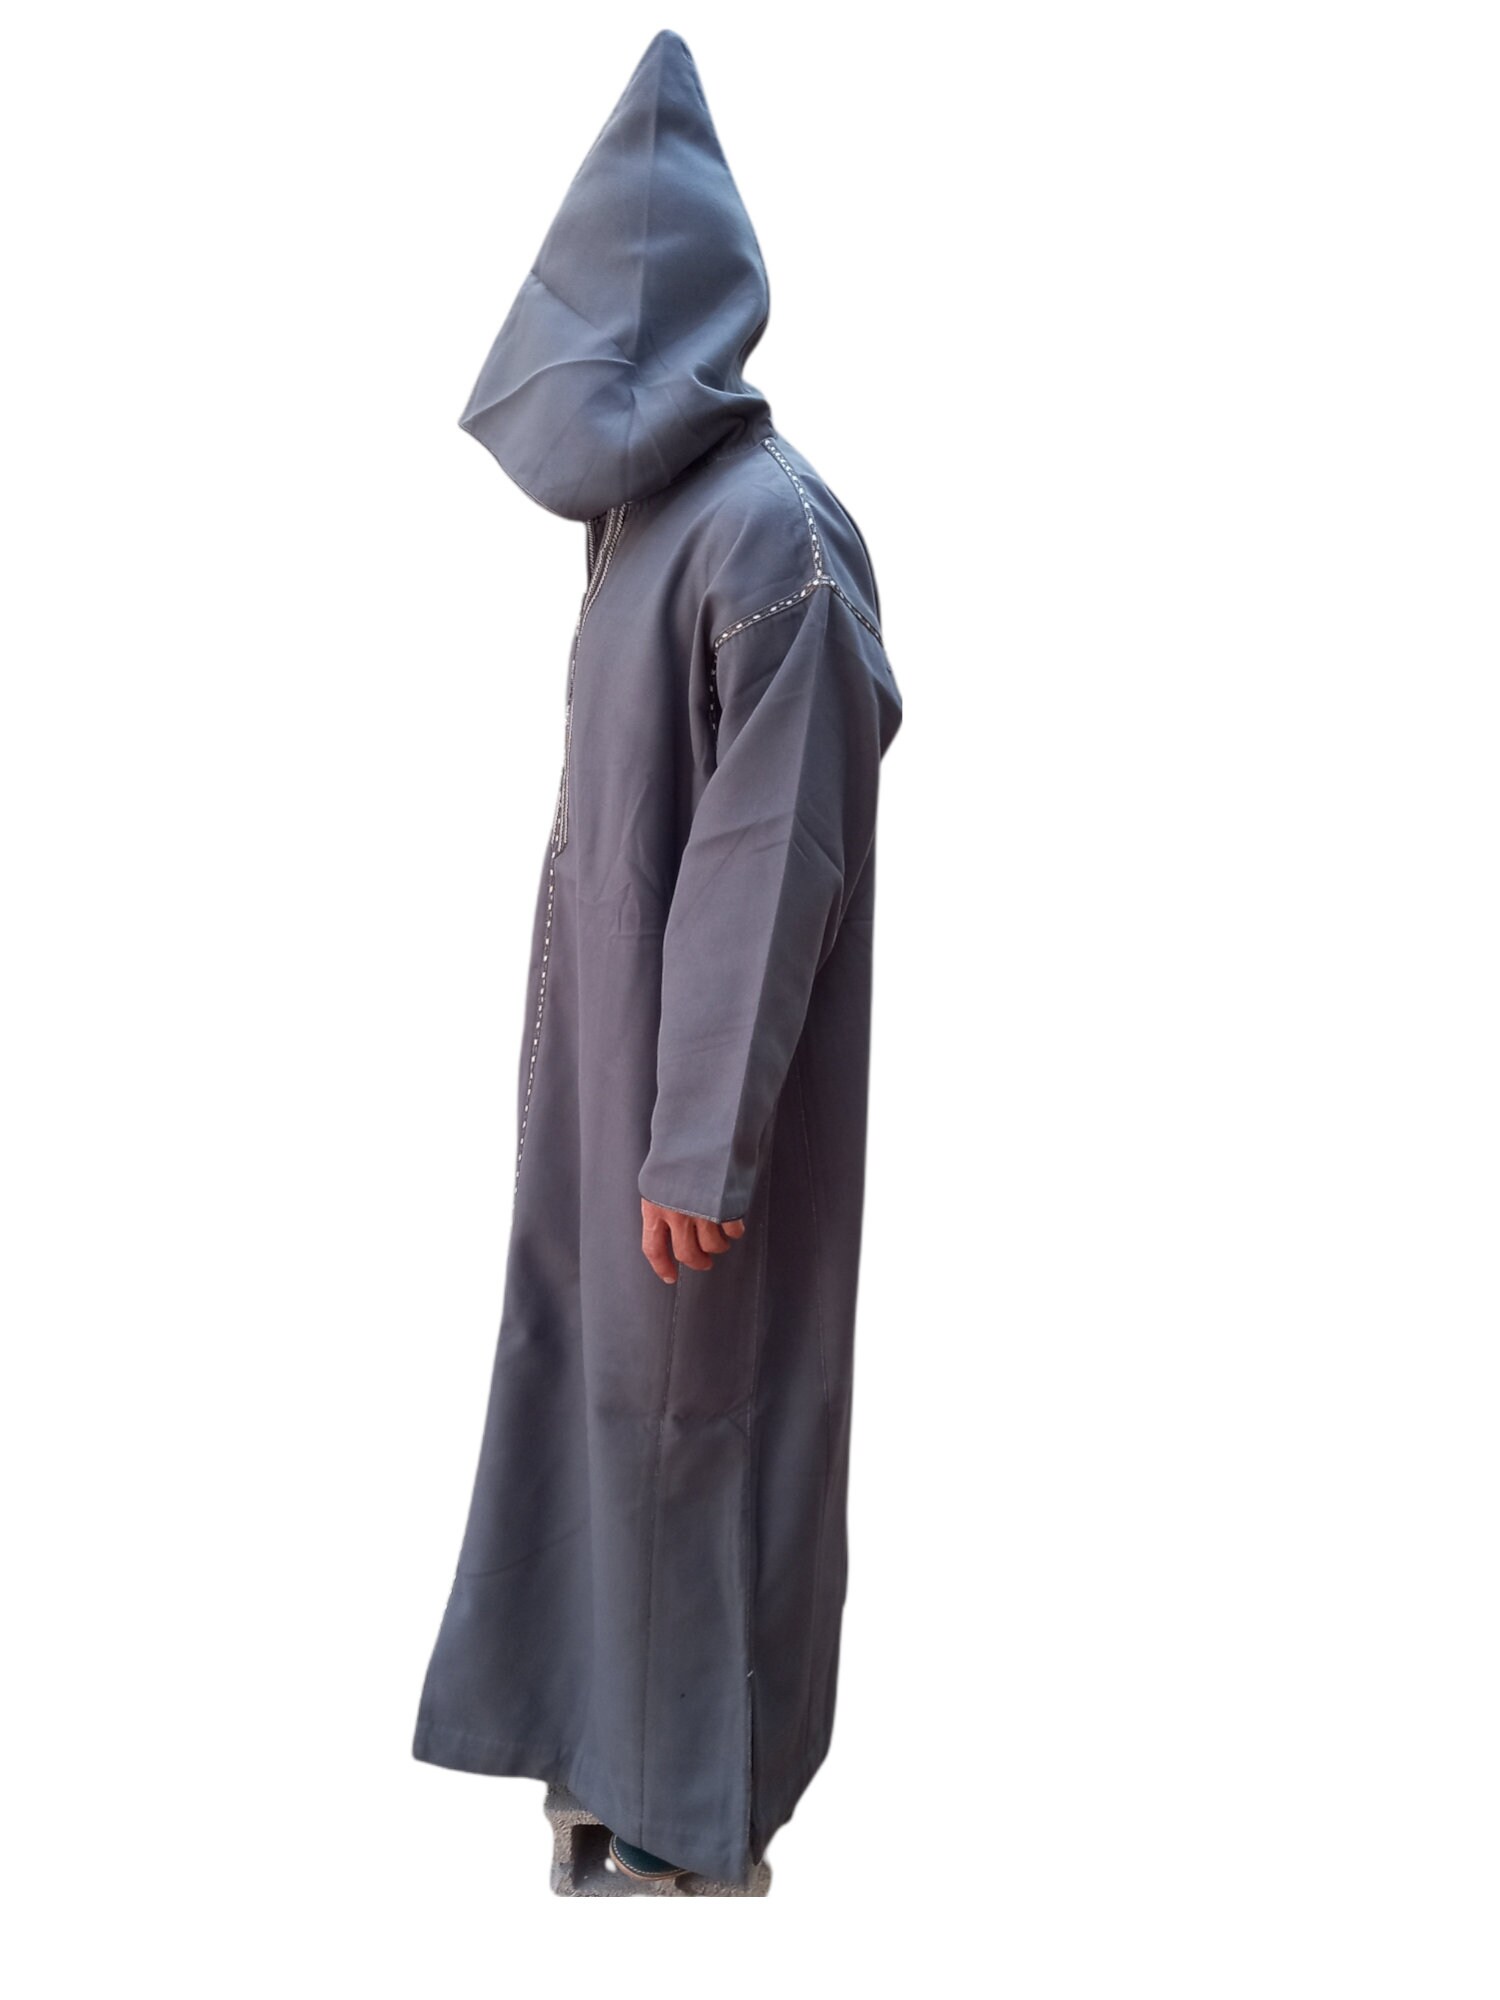 Very Large Size 59 Different Sizes/Colours Available Quality Moroccan hooded djellaba Hooded Jalabiya Hooded Qamees Hooded Jubba Kaftan